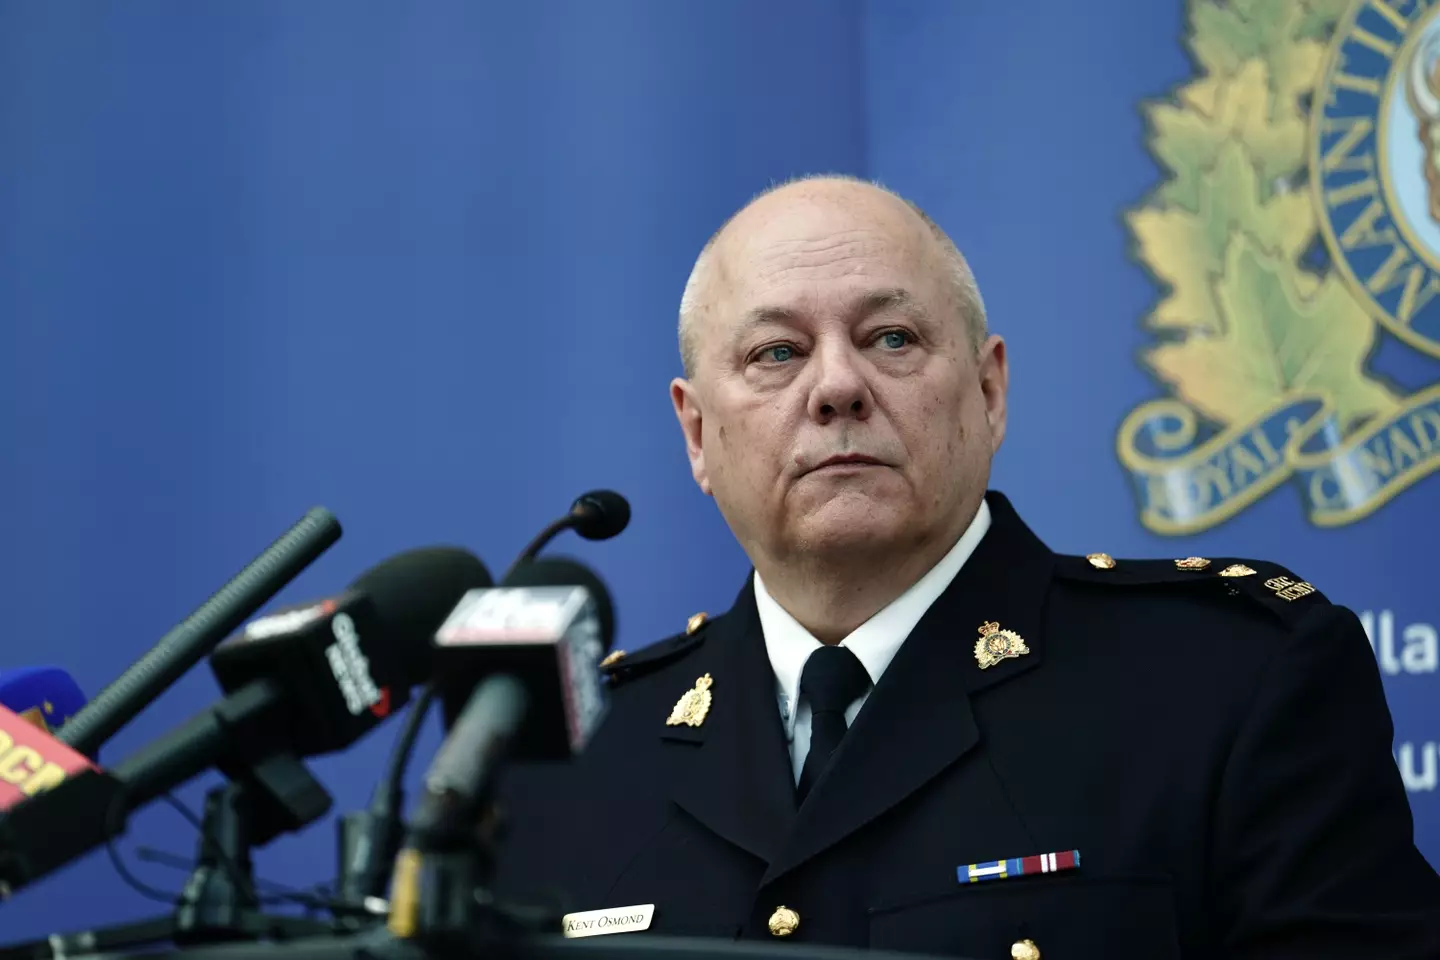 RCMP superintendent Kent Osmond announced the investigation into the sub's destruction.